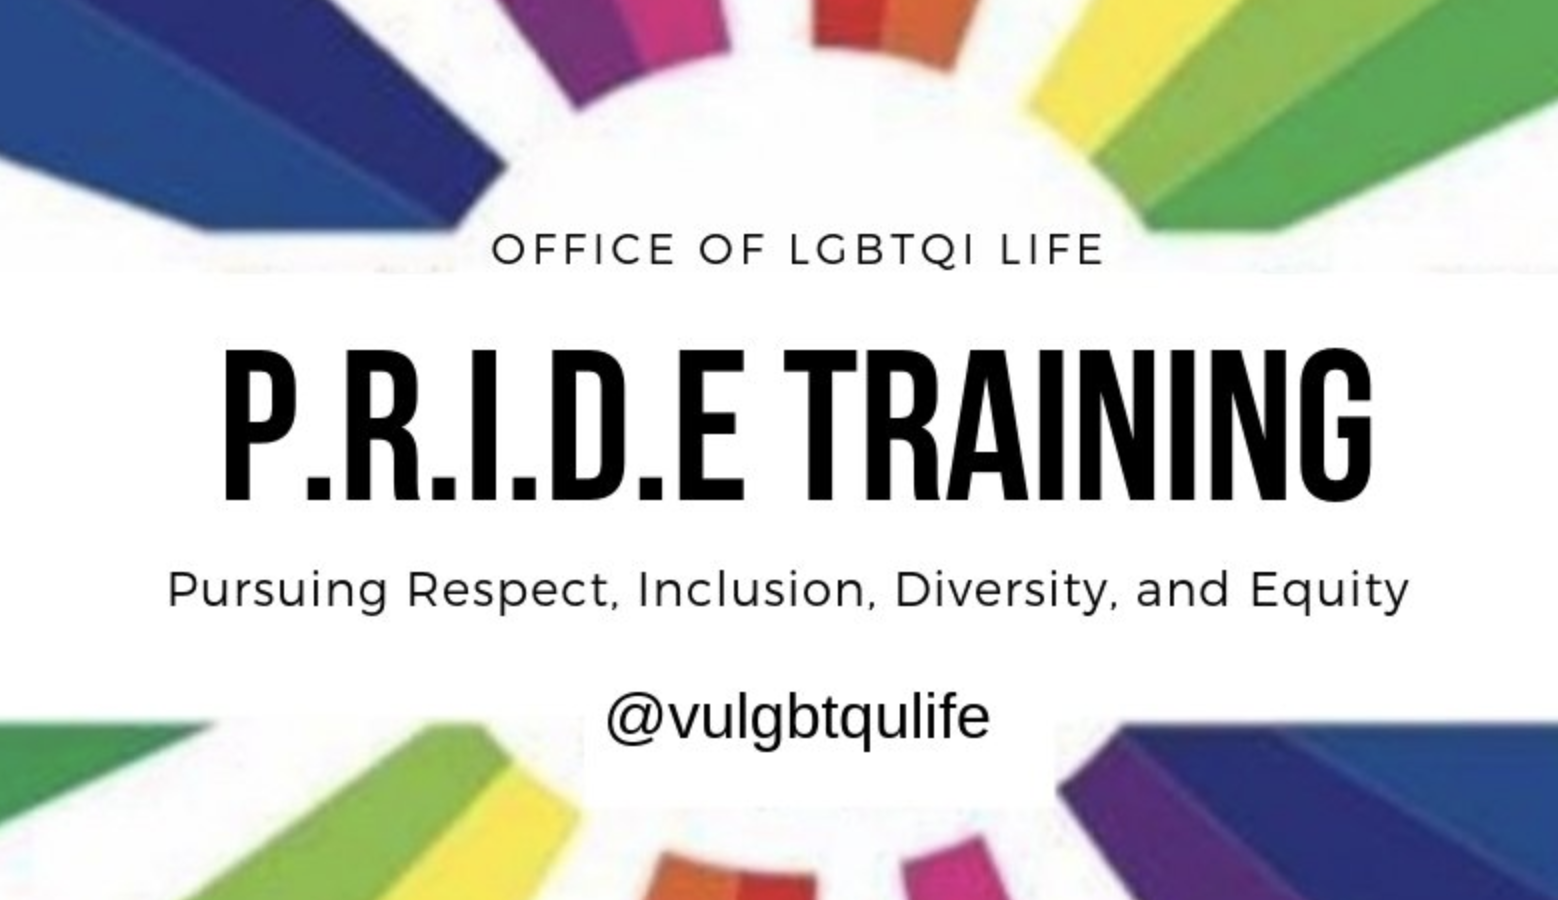 Office of LGBTQI Life. PRIDE Training. Pursuing Respect, Inclusion, Diversity and Equity. @vulgbtqlife